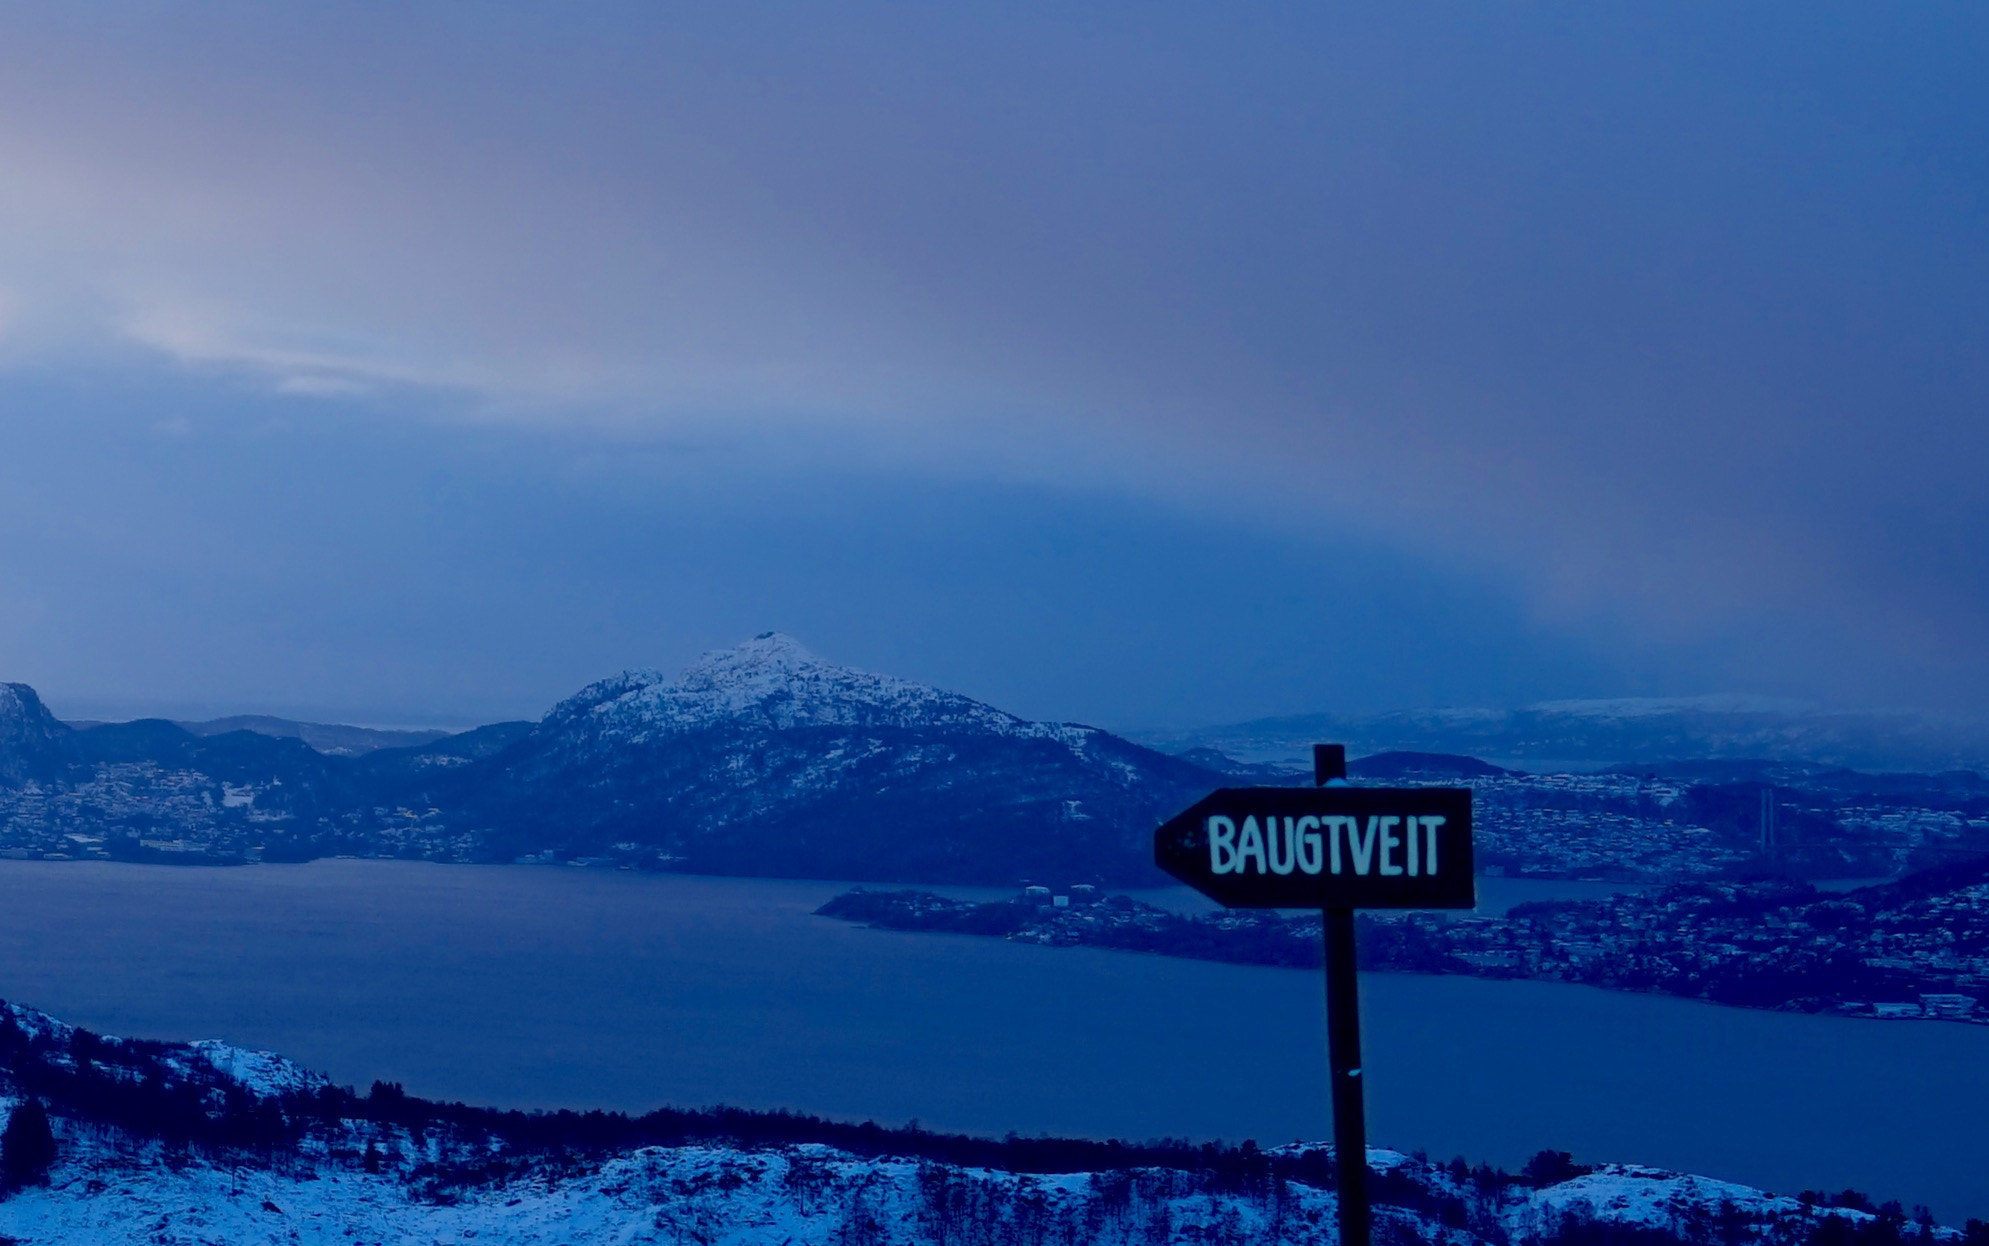 Sony a7 sample photo. Morning at nordgardsfjellet in bergen, norway photography